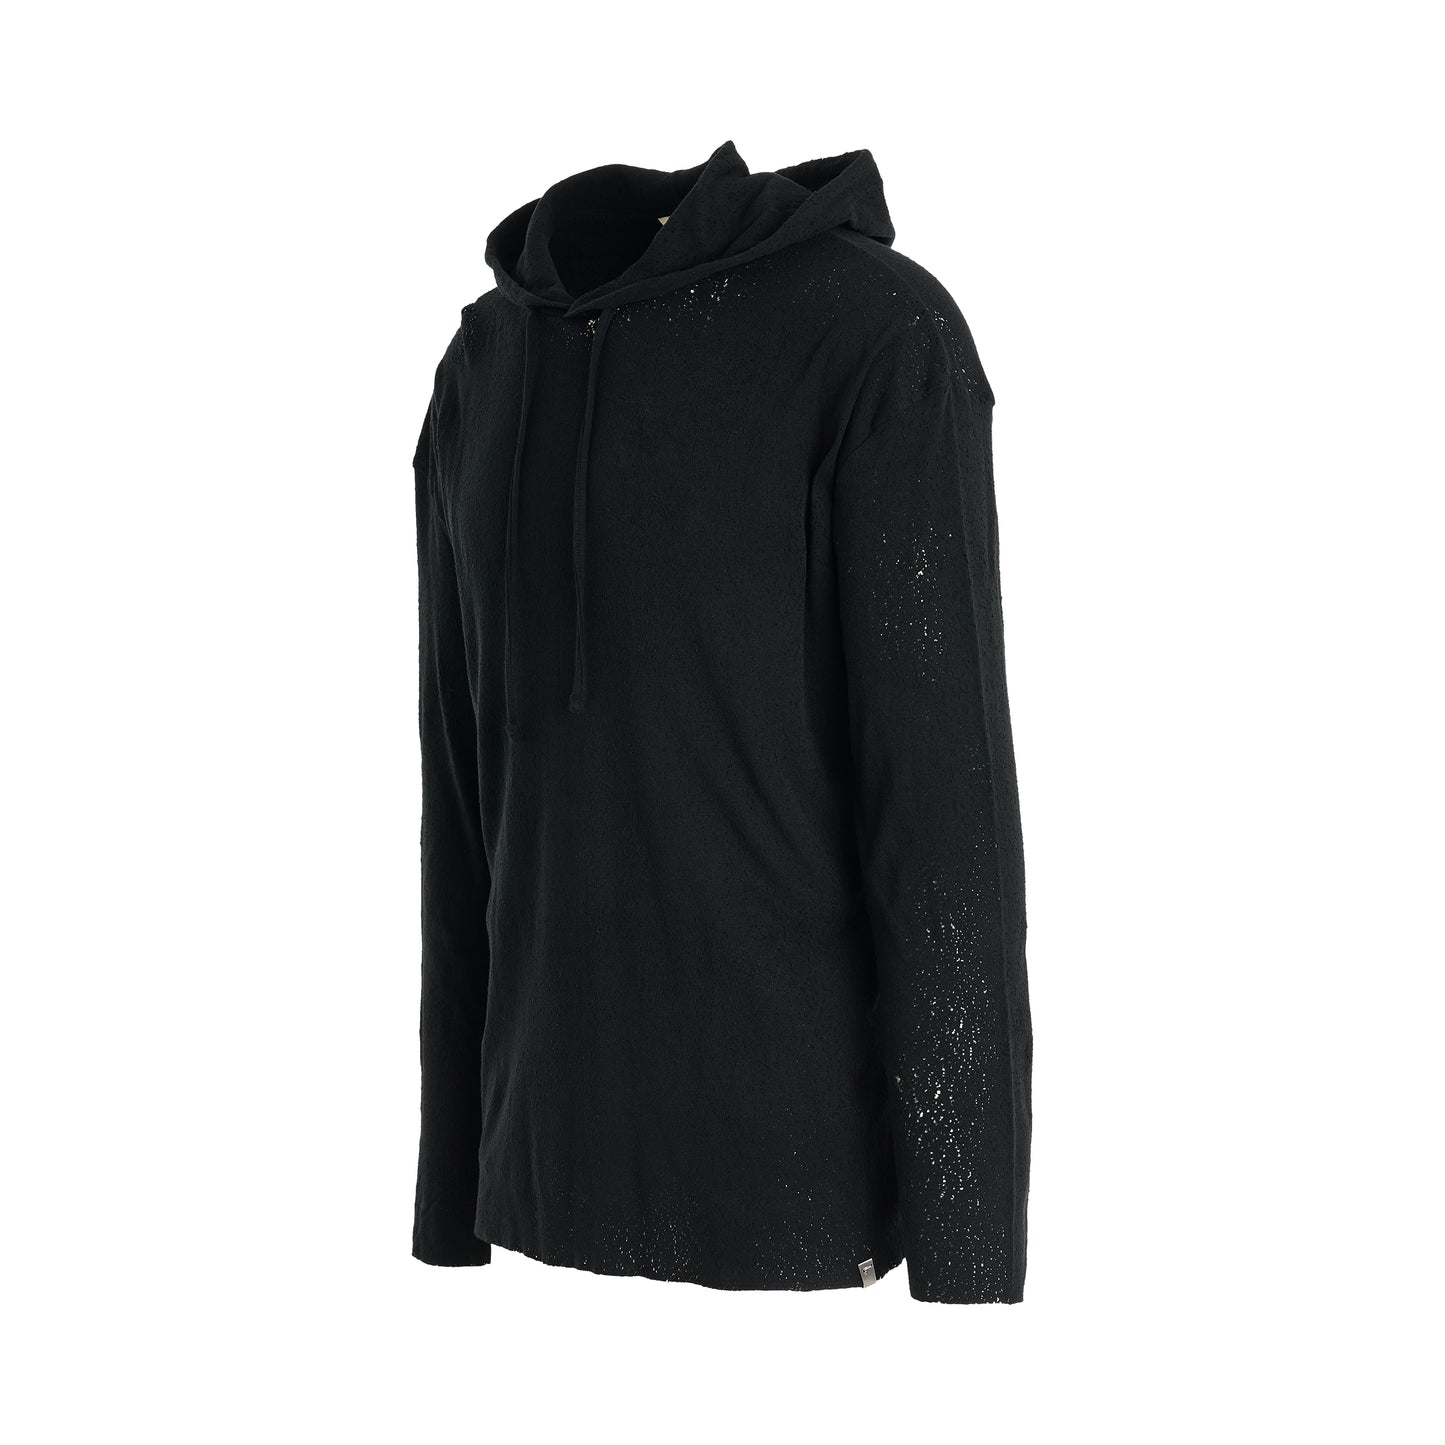 Destroyed Hooded T-Shirt in Black